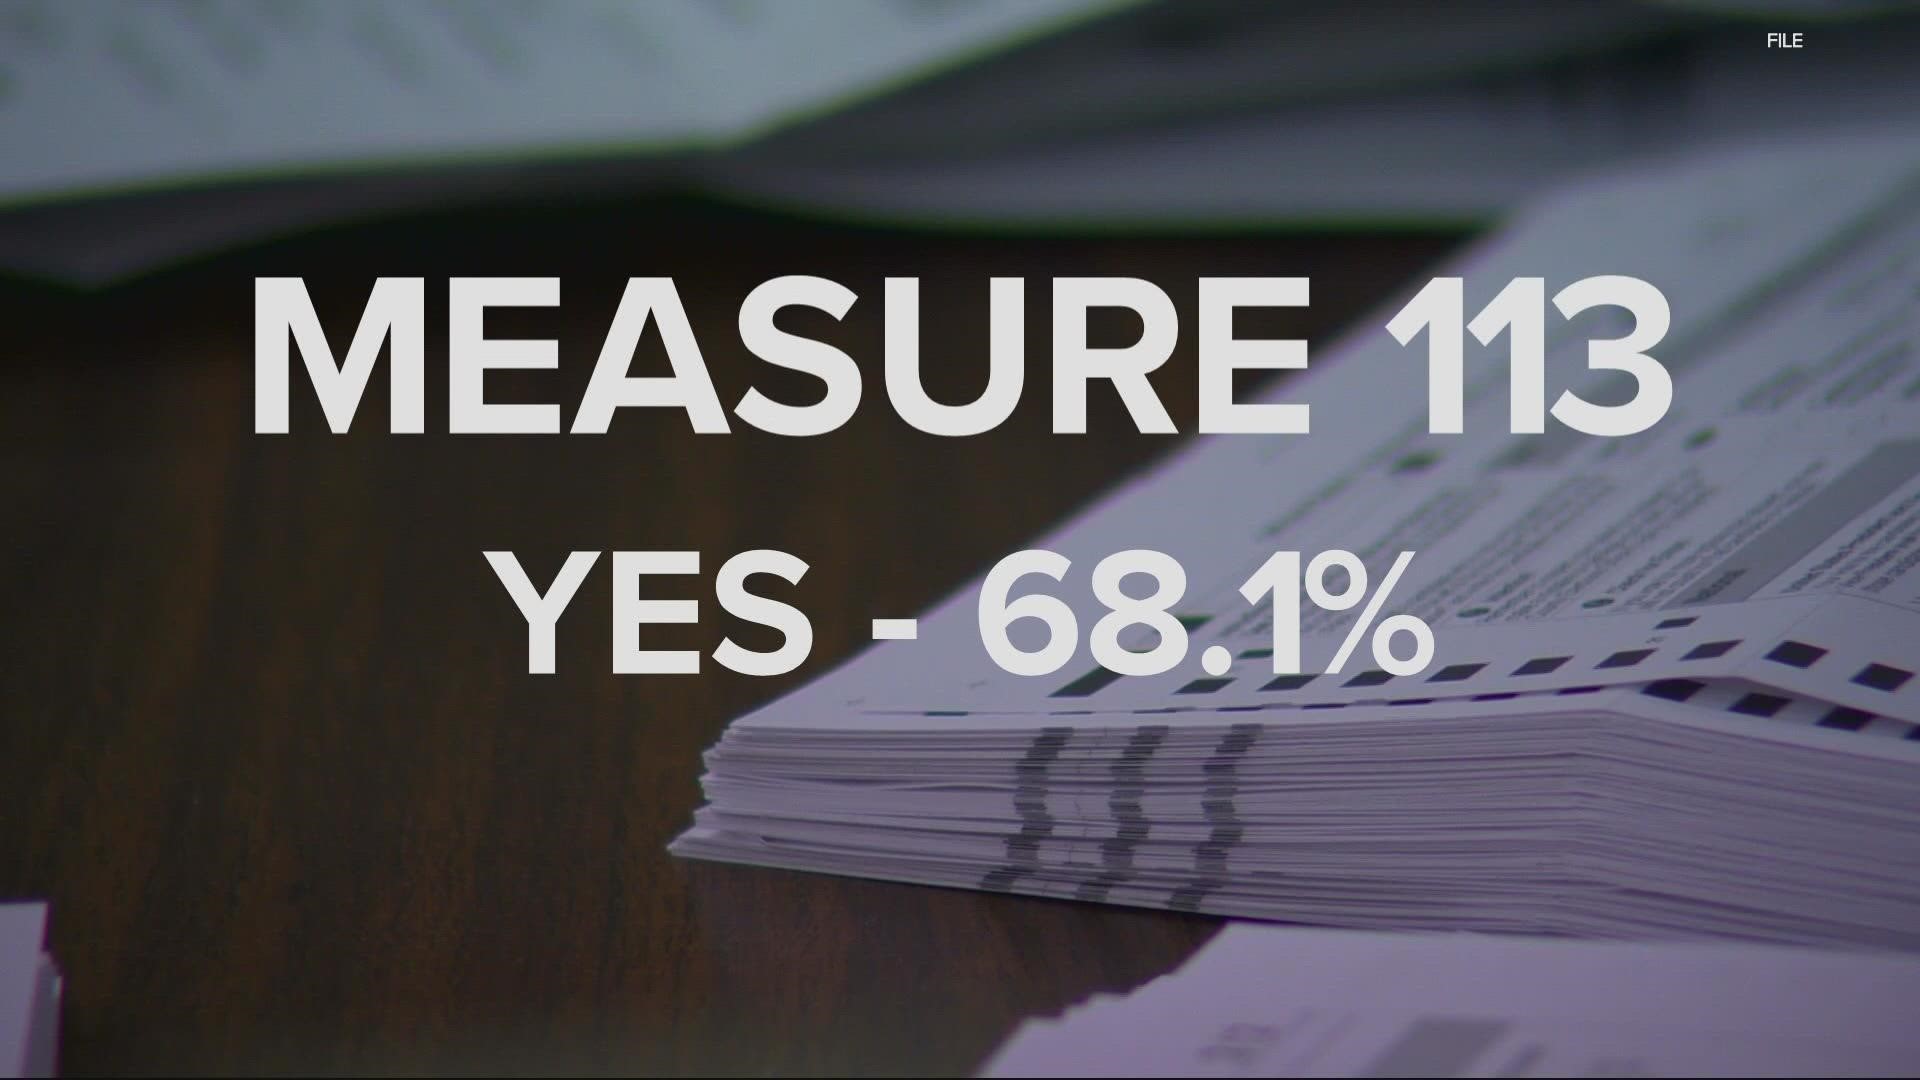 Measure 113 had clear majorities of Yes votes in early results Tuesday night, prompting The Oregonian to project the measure would pass.